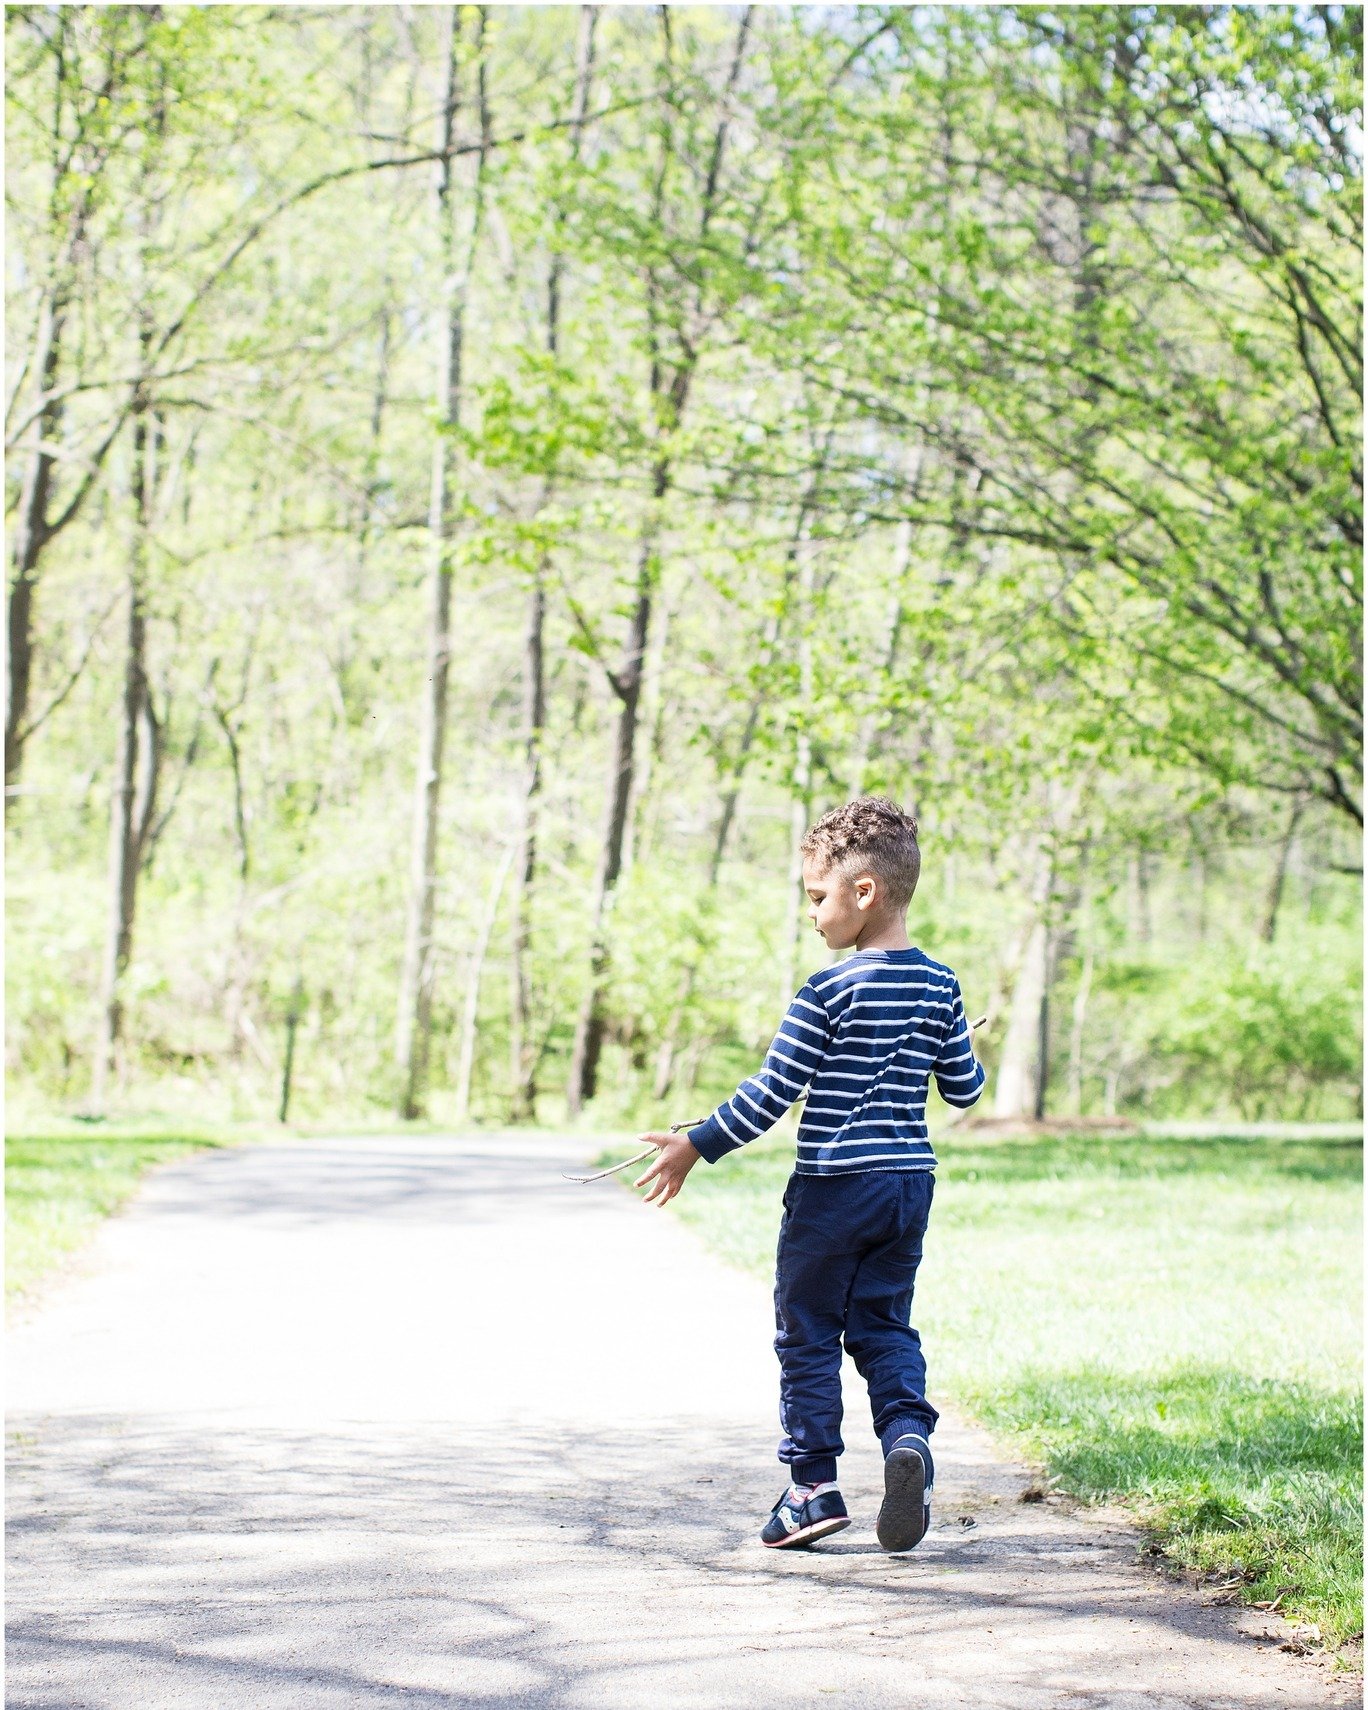 Happy Earth Day! 🌍

.
.
.
.
.
#ginnyfilerphotography #gfpfamilies #familyphotography #dmvfamilyphotographer #marylandfamilyphotographer #kids #blessing #washpost #huffpostgram #portrait #familysession #familyphotographer  #washingtondaily #liveuthen